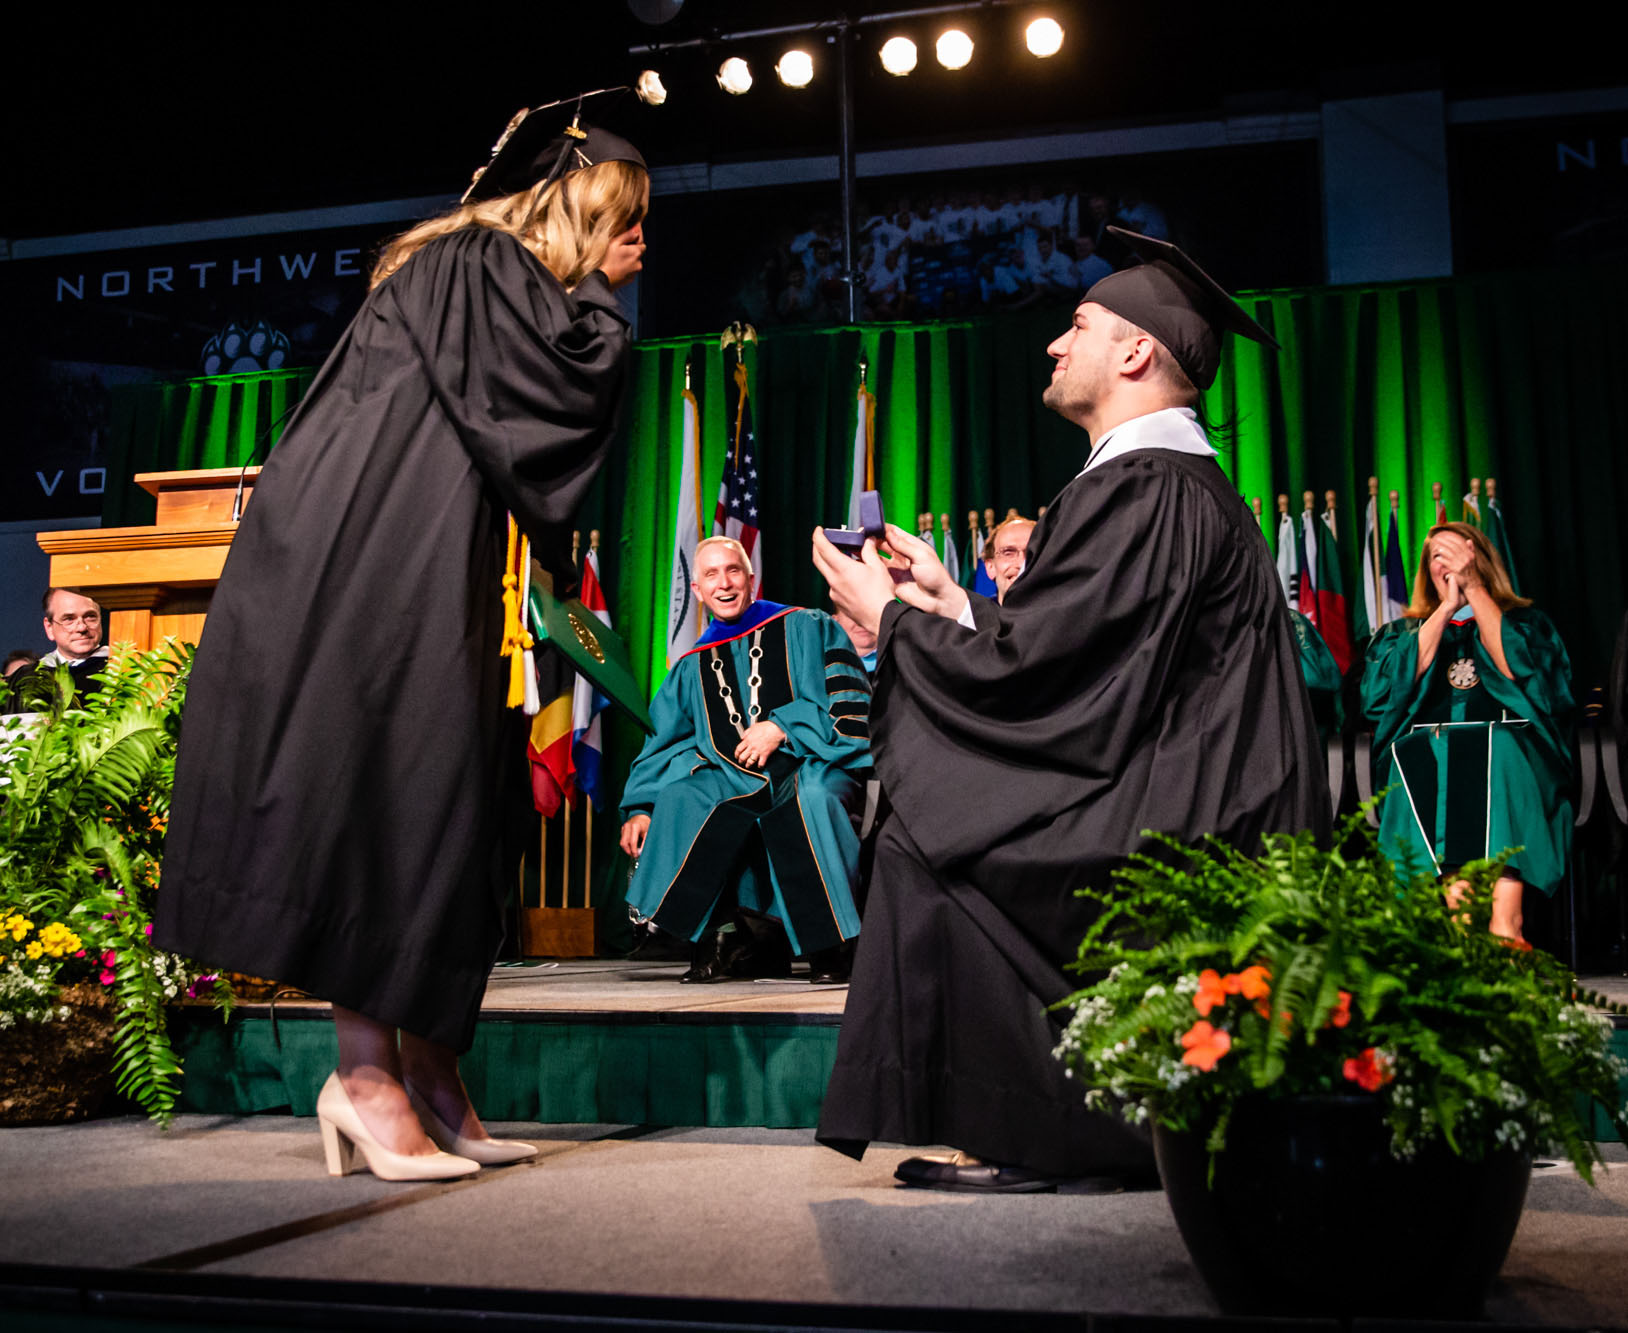 Northwest graduate Shane Miller proposes to classmate Sierra Horan during Friday's commencement ceremony.